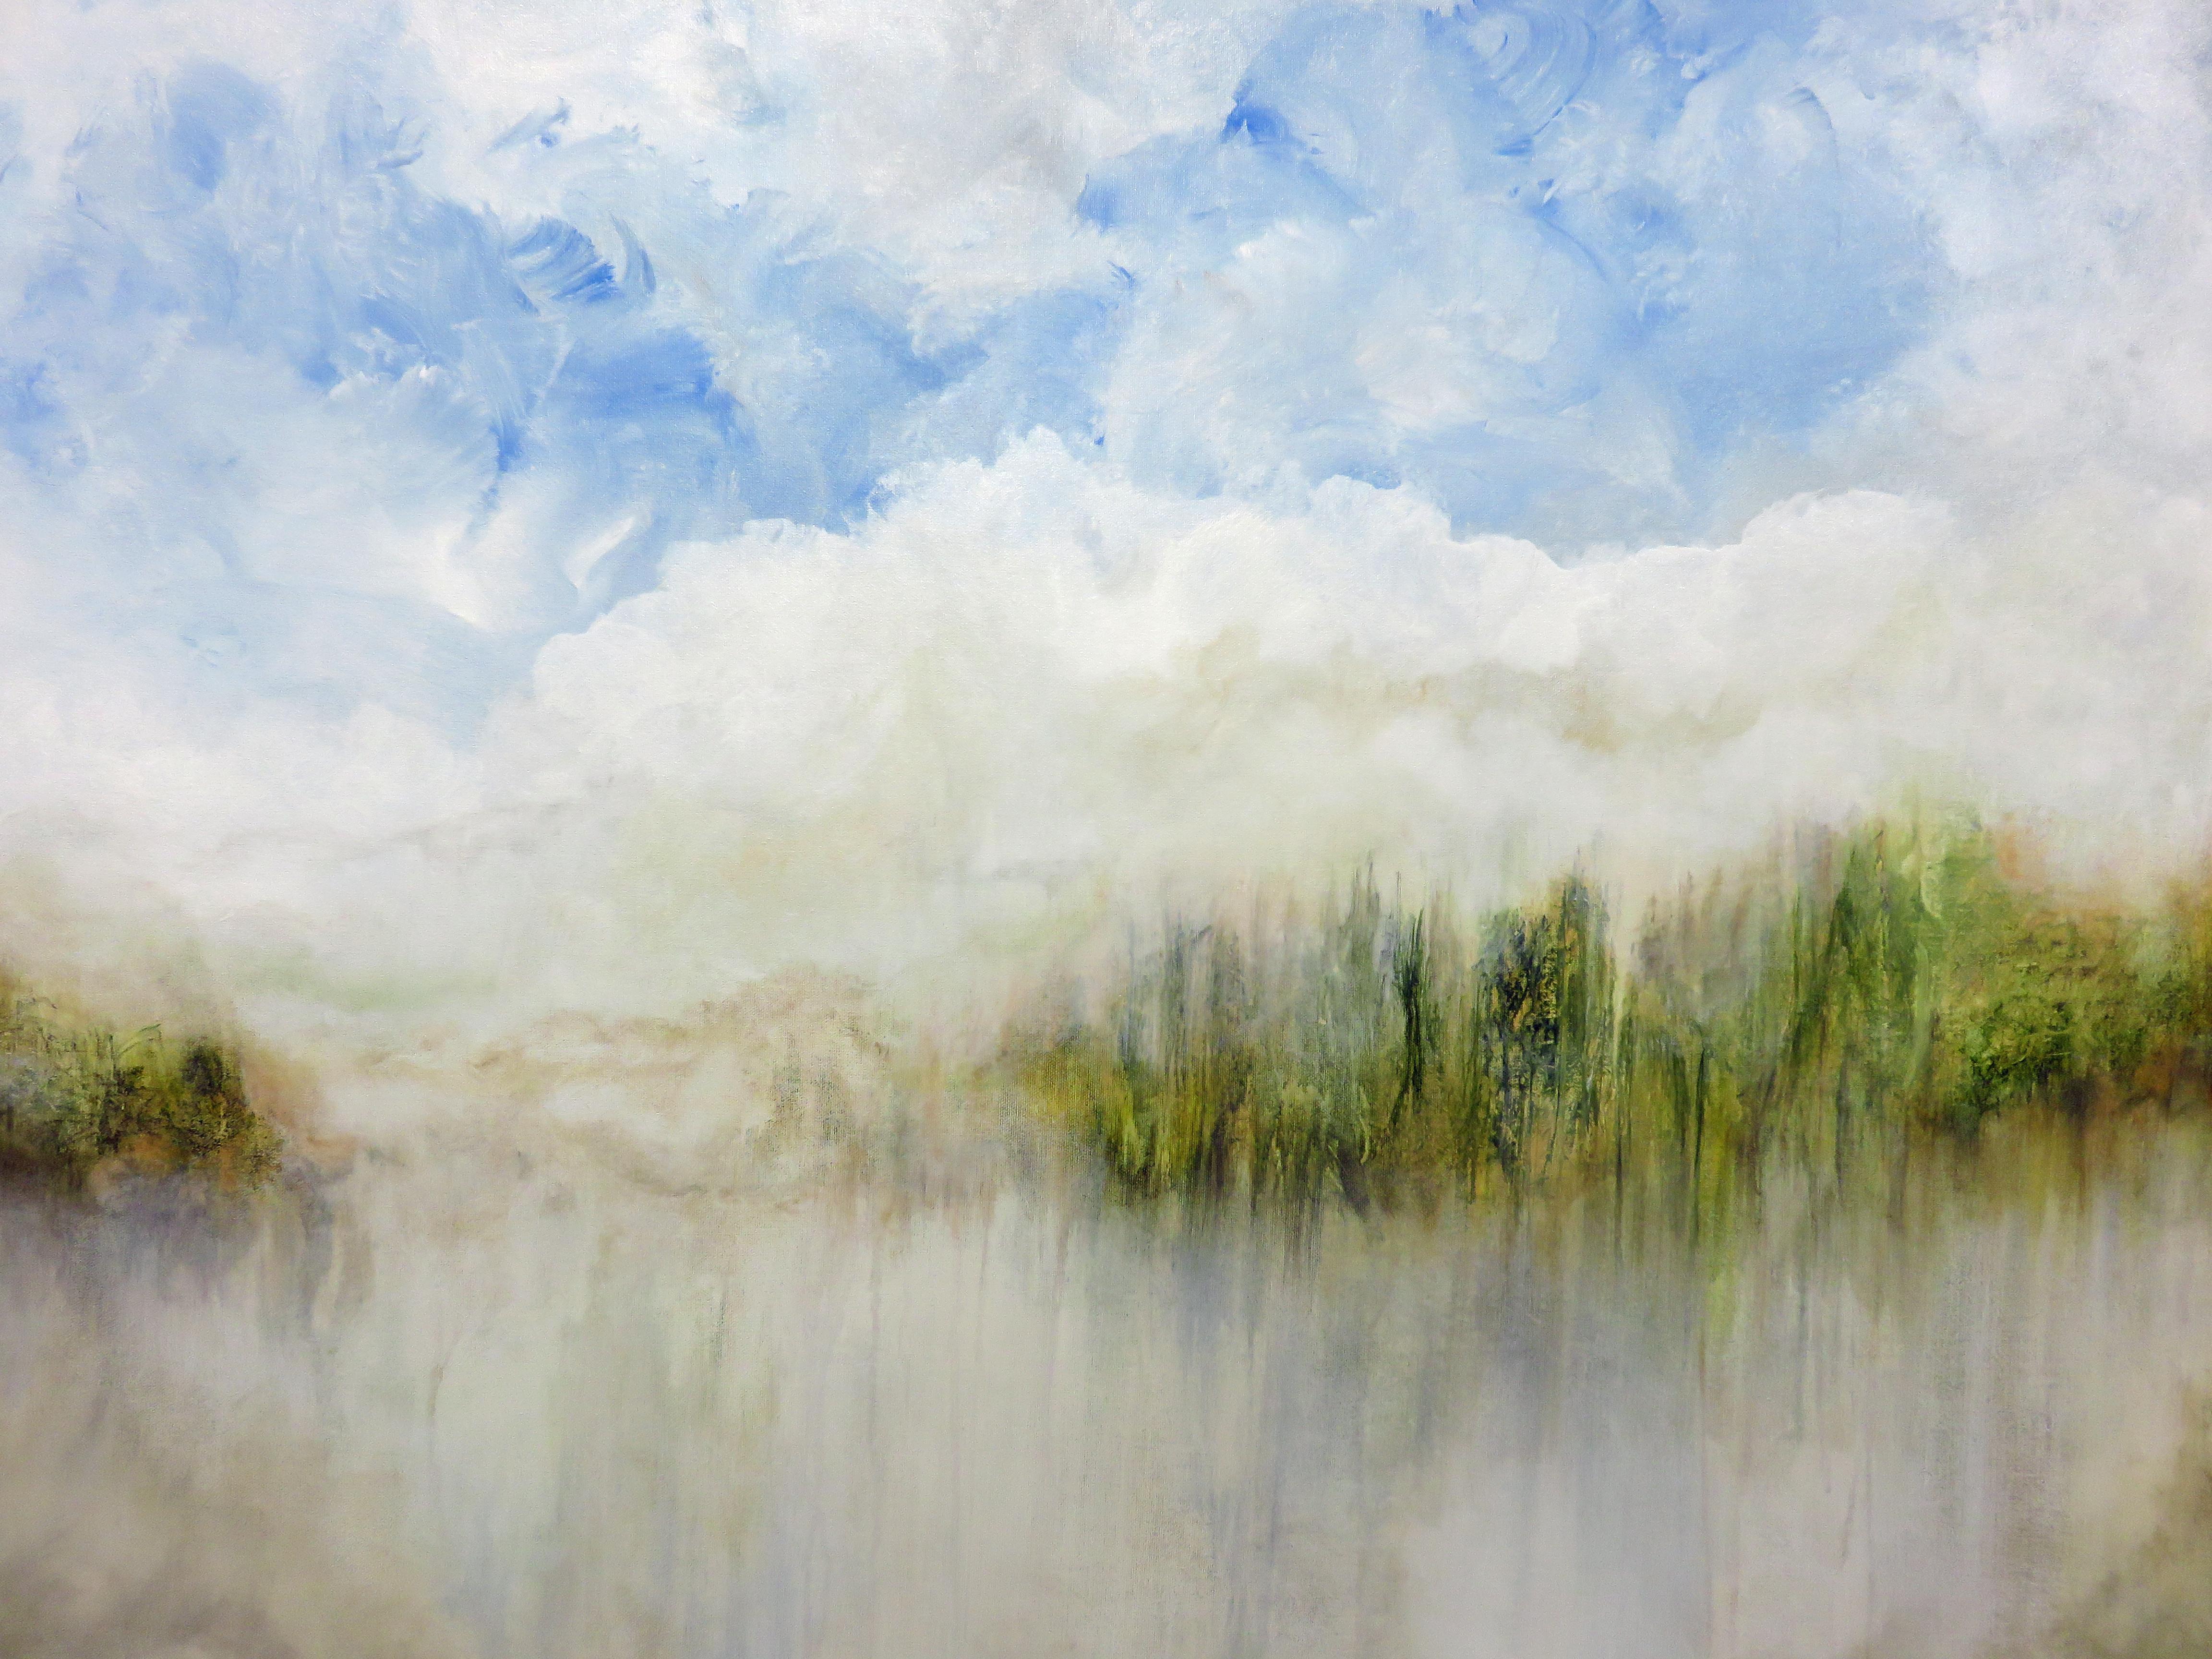 <p>Artist Comments<br /> I could gaze at this painting all day! It has an uplifting and calming presence, and because of its size, you feel like you are being wrapped in a luxurious blanket;that is how I feel with it hanging in the room.  The clouds